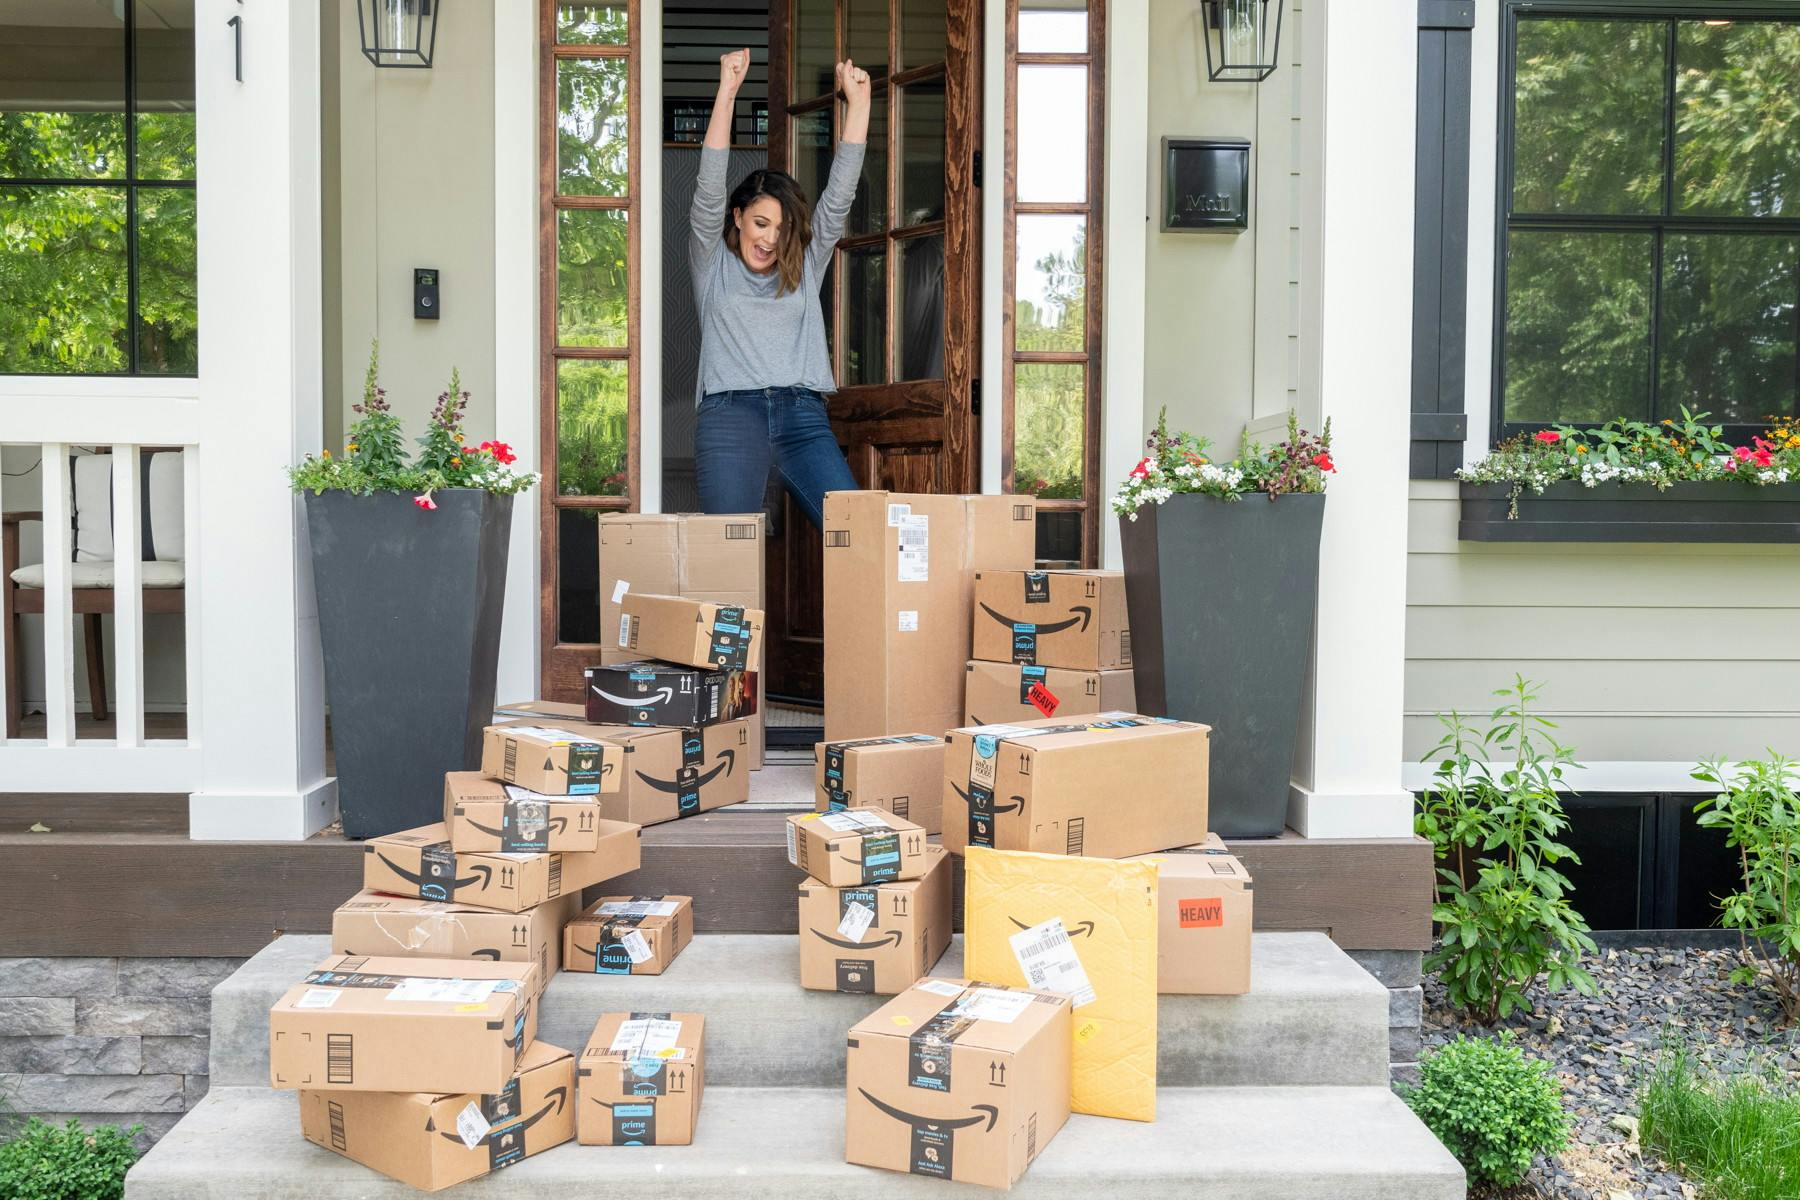 Why Is Amazon Delivery So Slow In 2022? (7 Reasons Why)